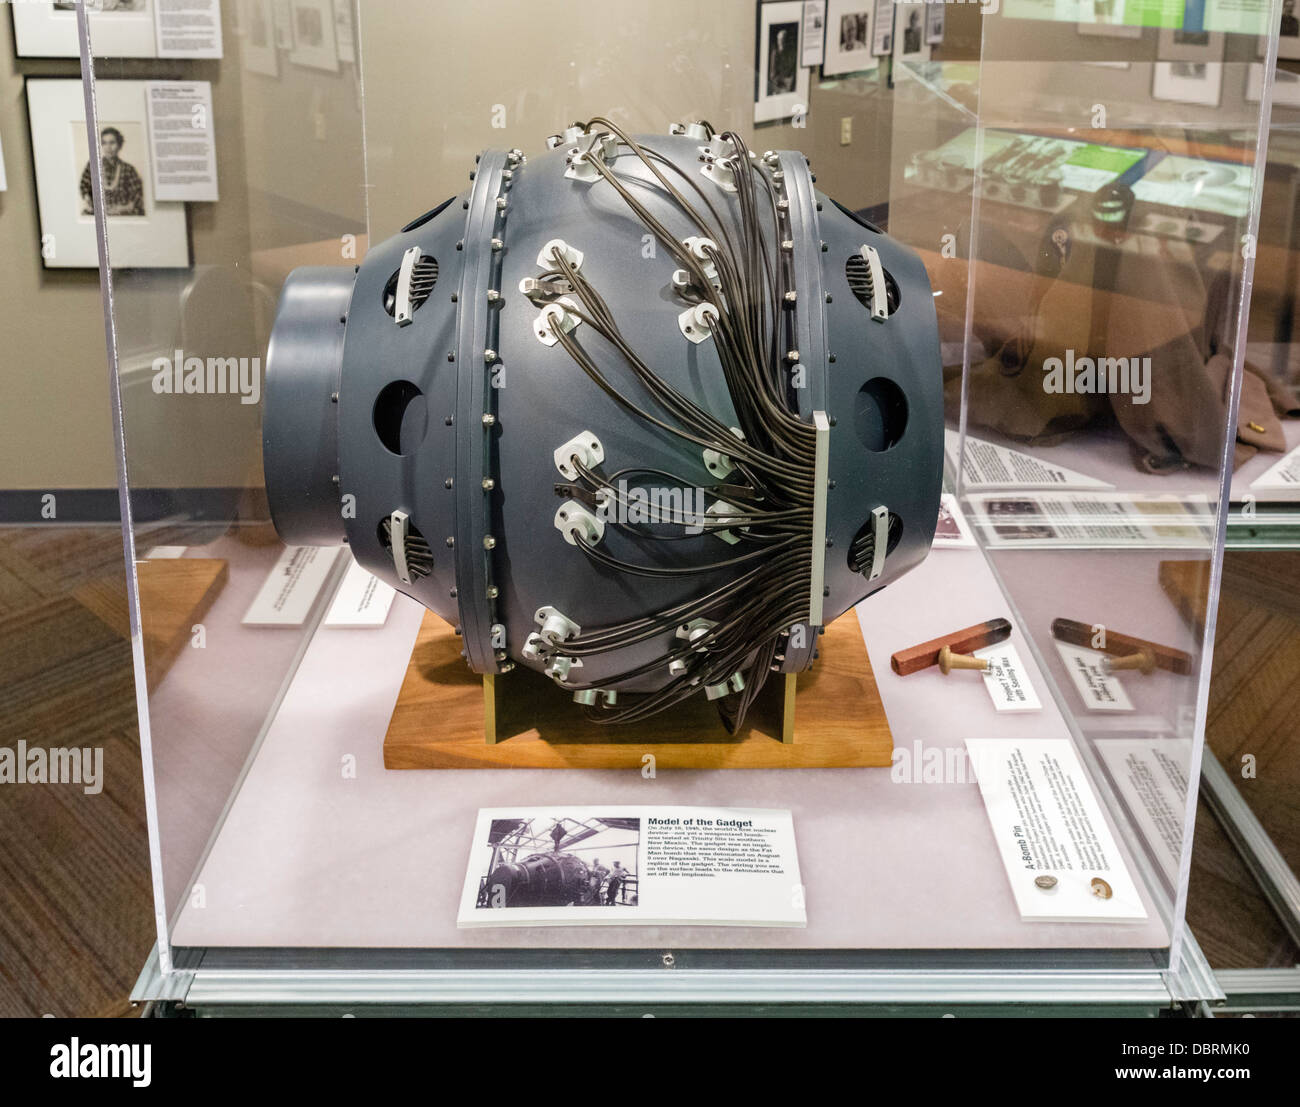 Scale model of 'The Gadget', first nuclear device tested at Trinity Site in 1945, Bradbury Science Museum, Los Alamos, NM, USA Stock Photo